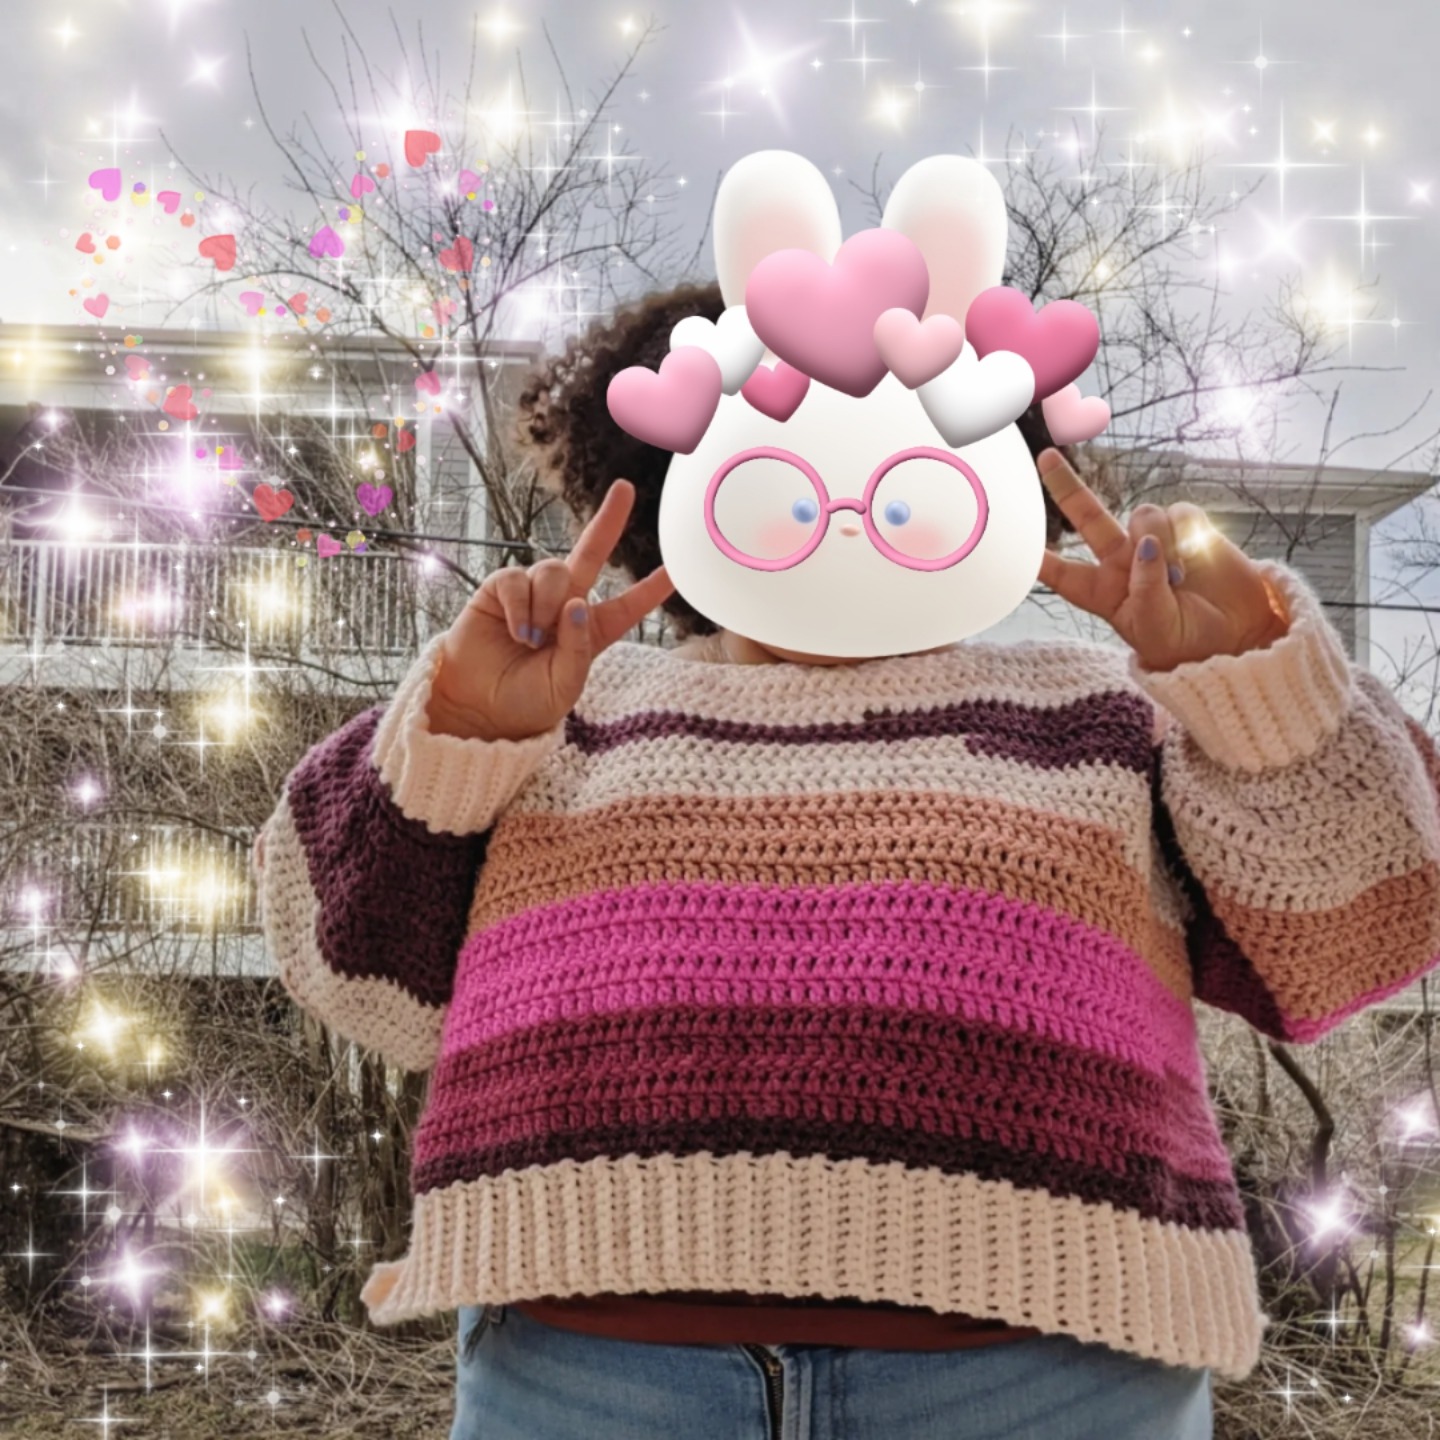 Crocheted sweater with a pink and white color paletter